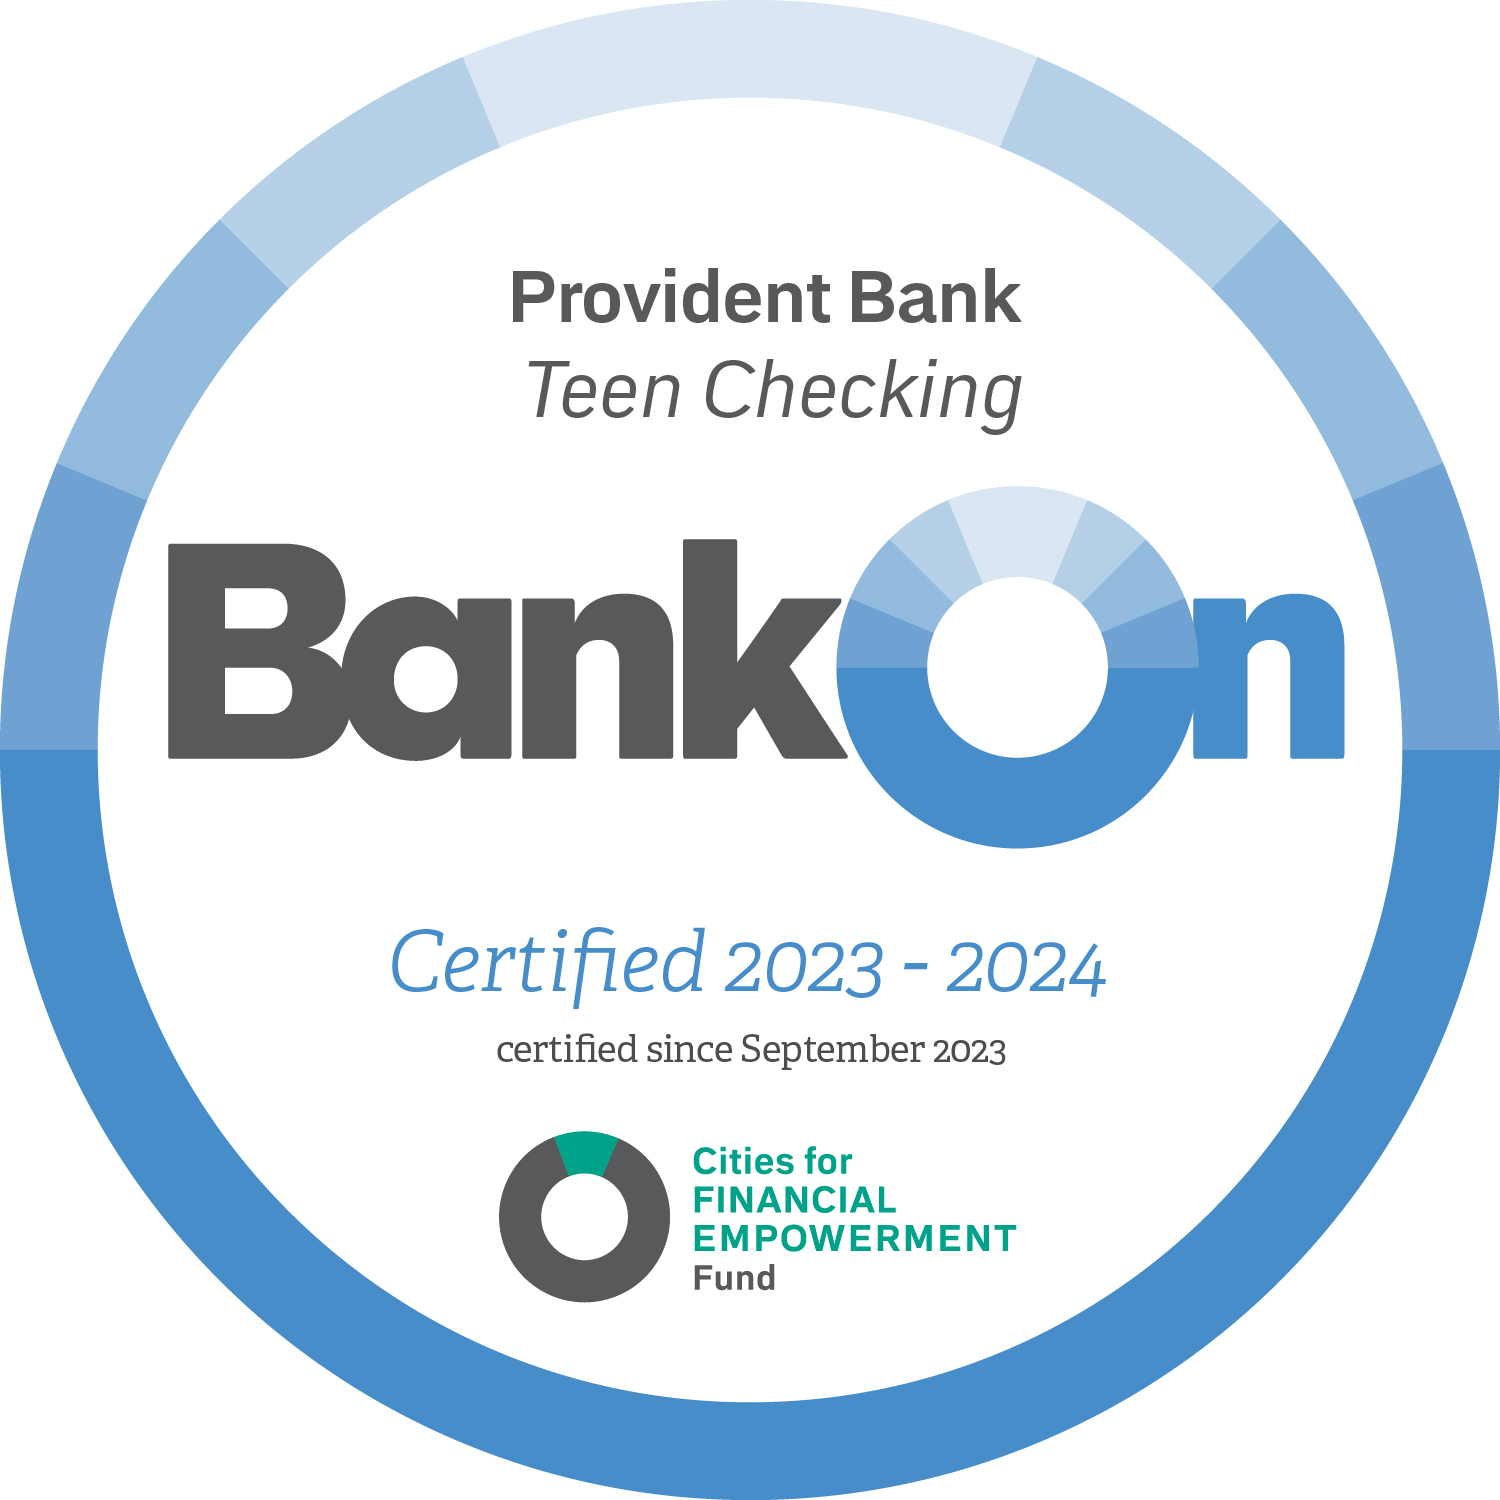 Image reads: Provident Bank eVantage. BankOn National Account Standards 2021 to 2022 Approved. Certified since November 2020. Cities for FINANCIAL EMPOWERMENT Fund.